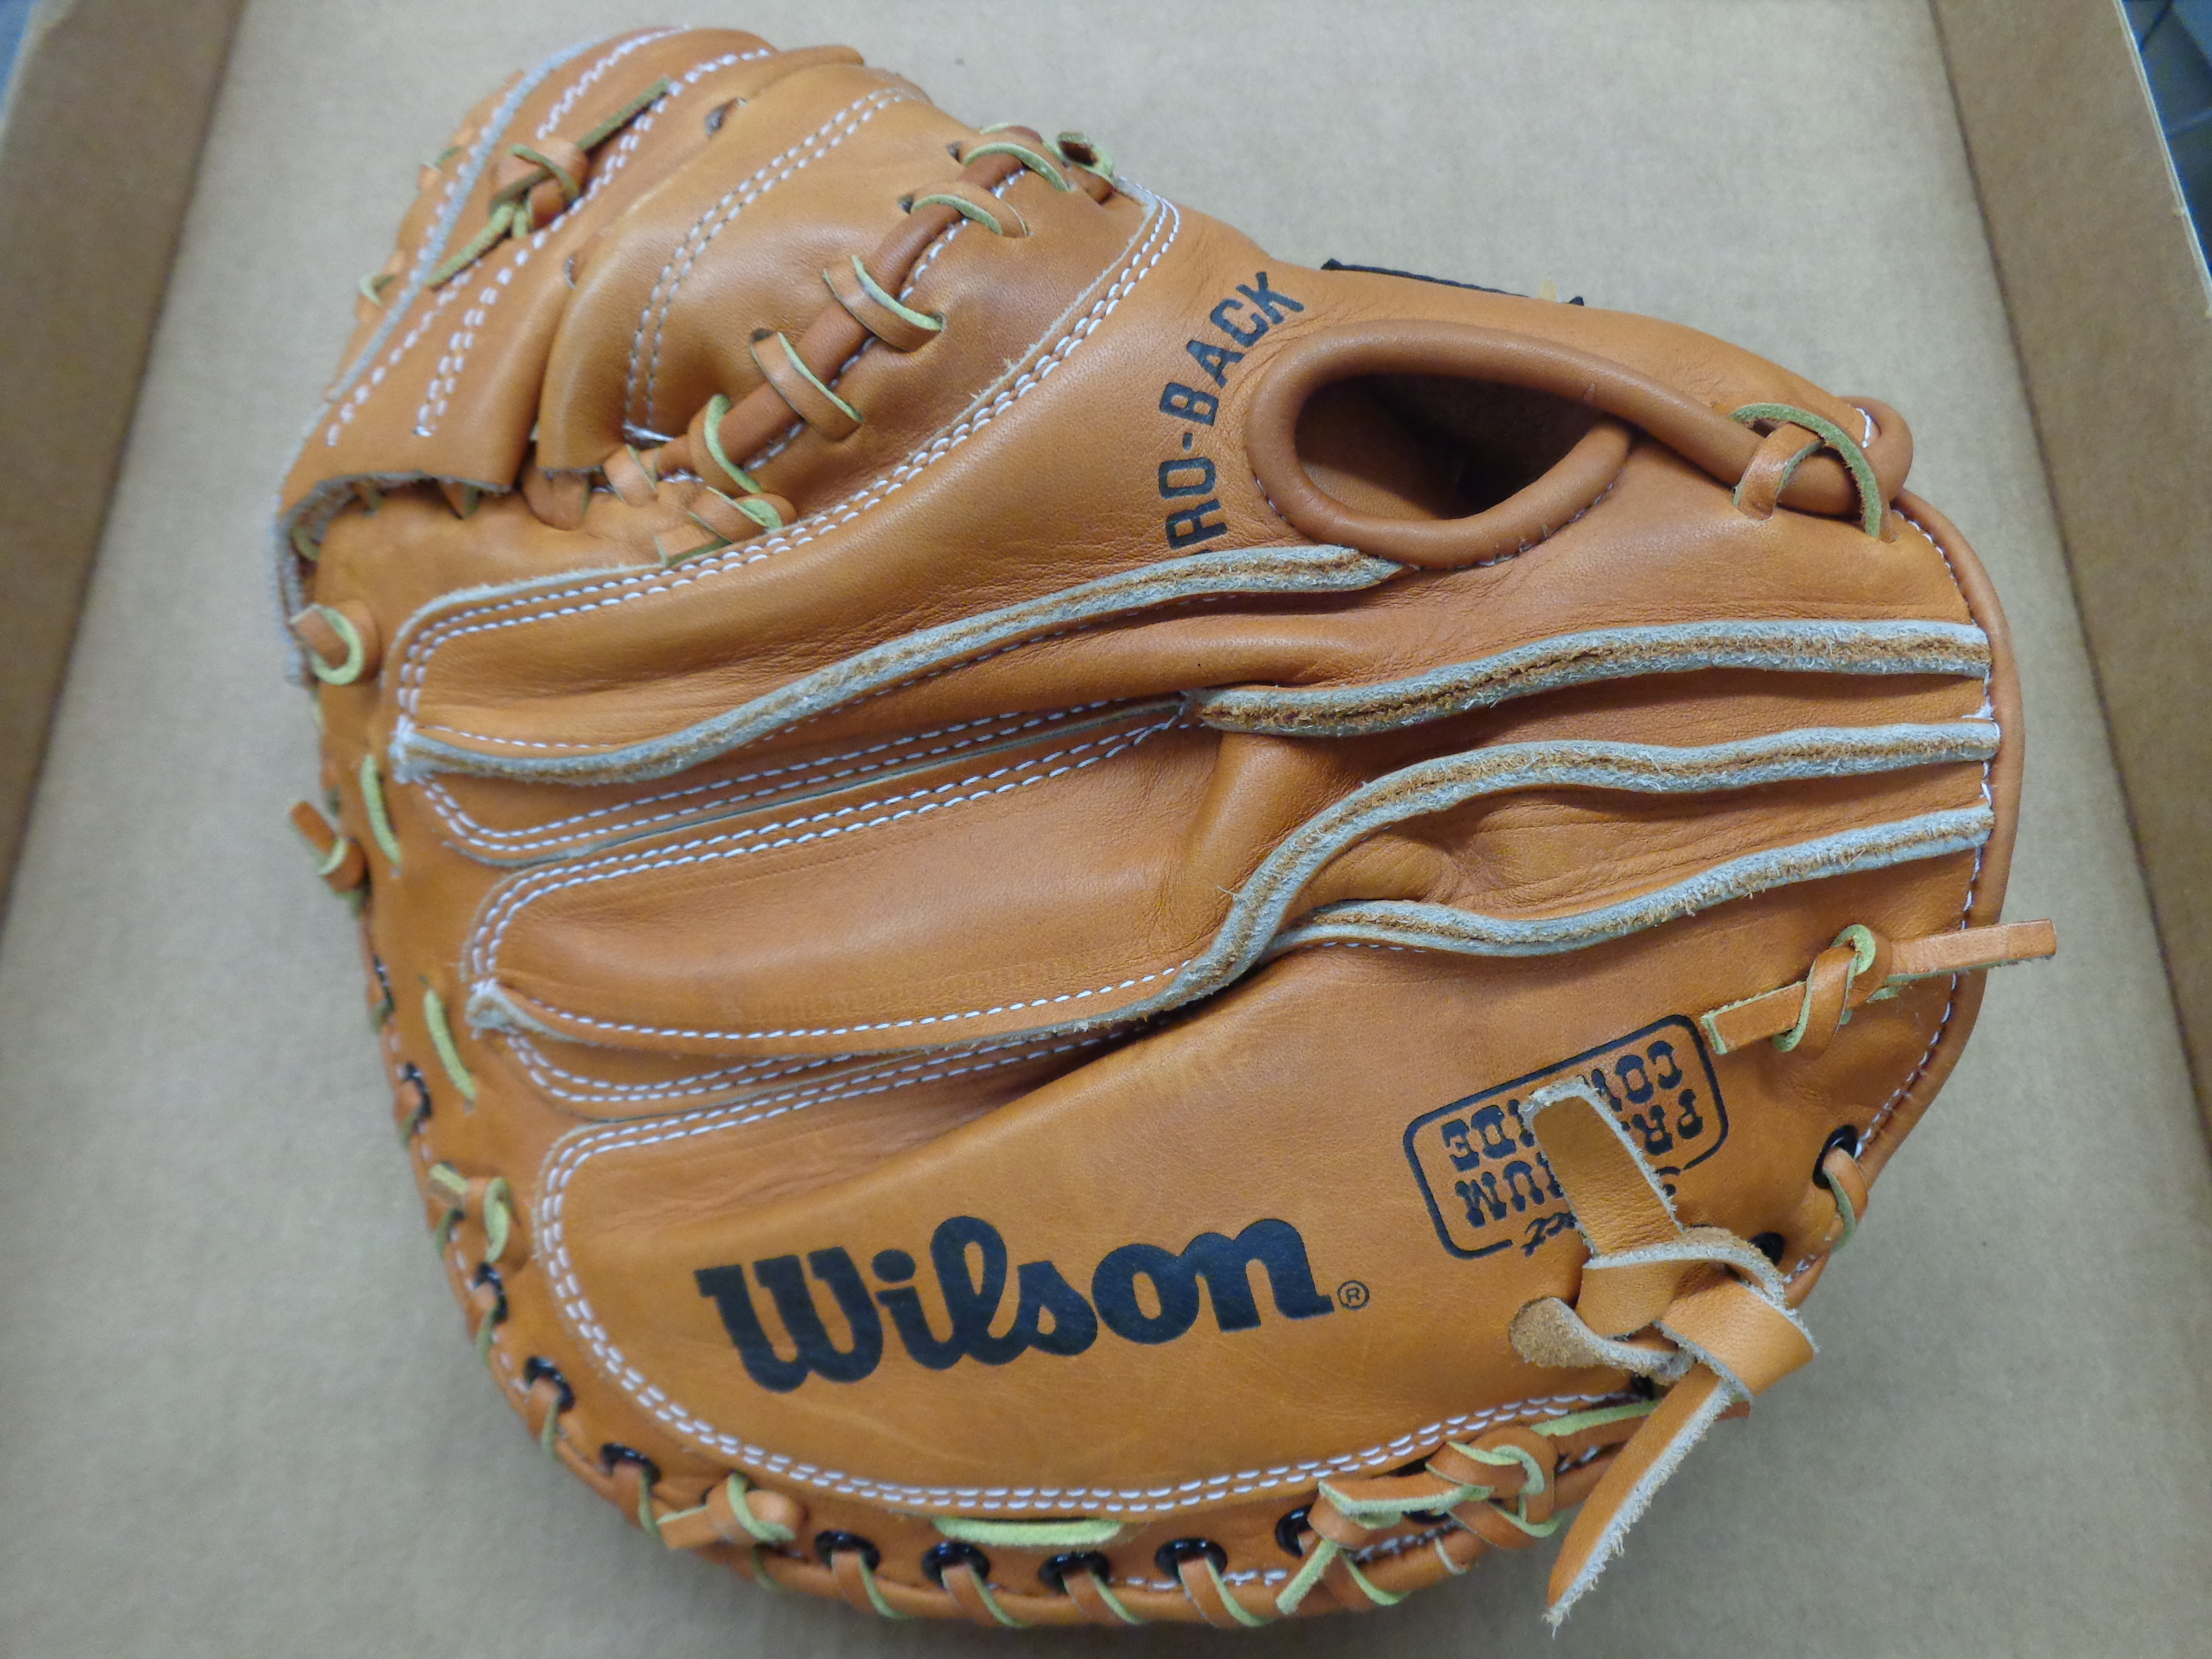 BENITO SANTIAGO Autographed **BRAND NEW** Wilson A2500 Catcher's